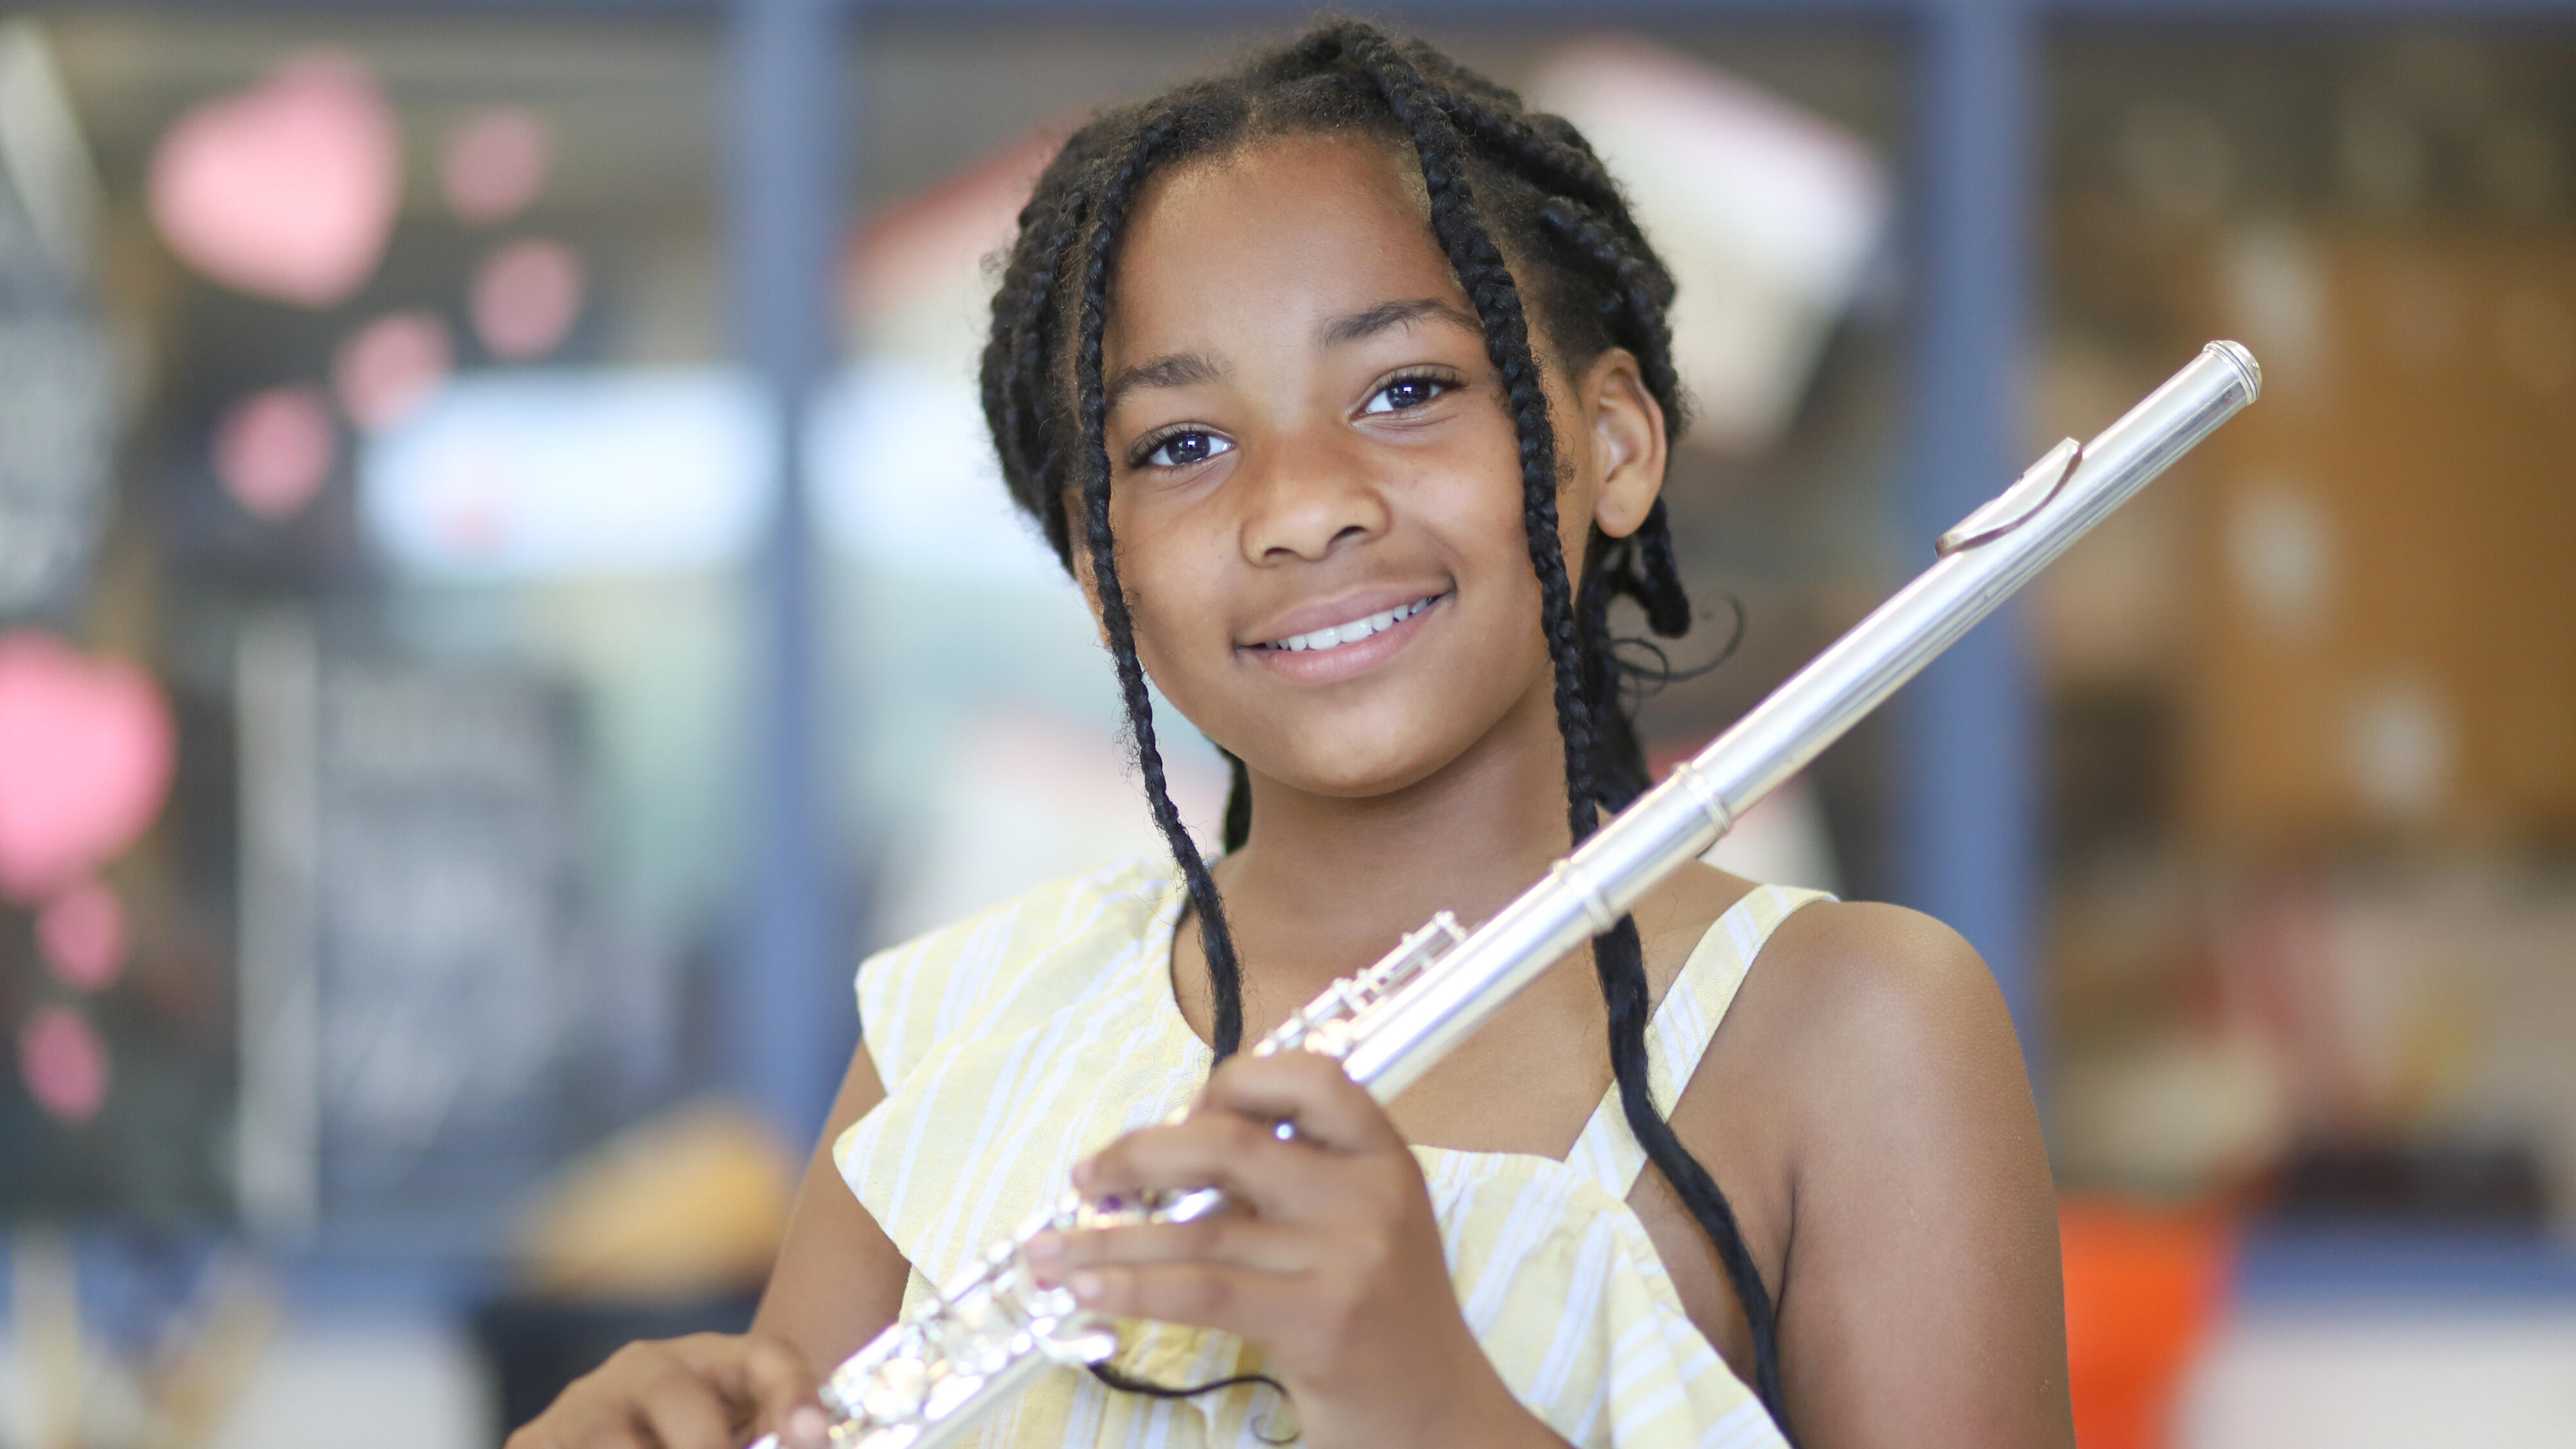 Student smiling and holding a flute